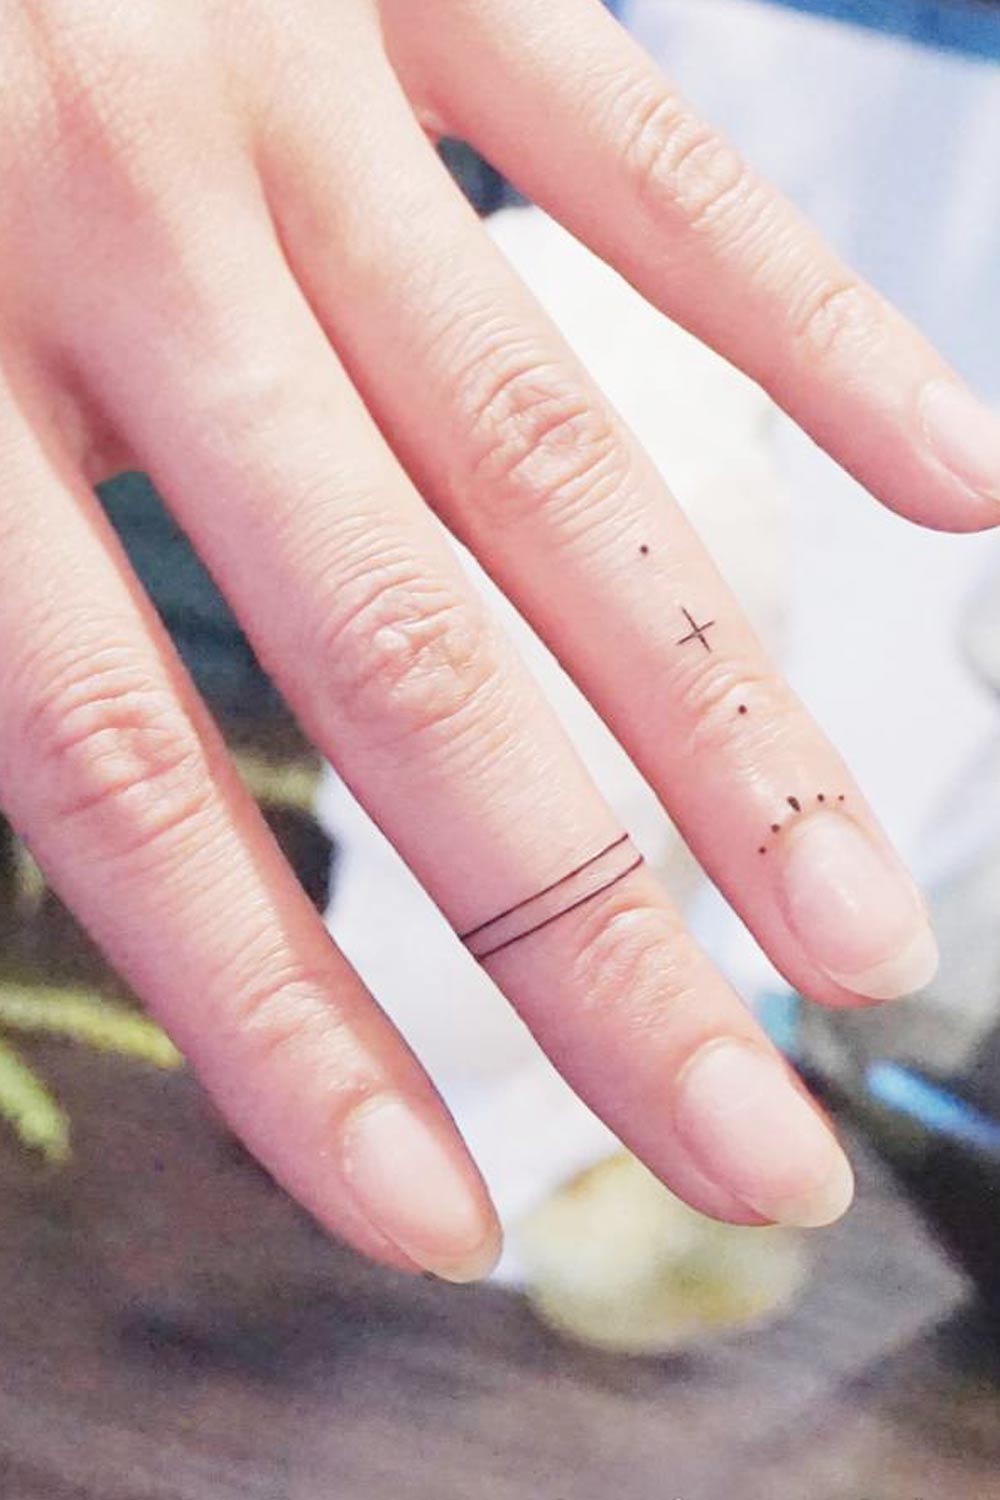 50 Fabulous Finger Tattoos by Some of the World's Best Artists